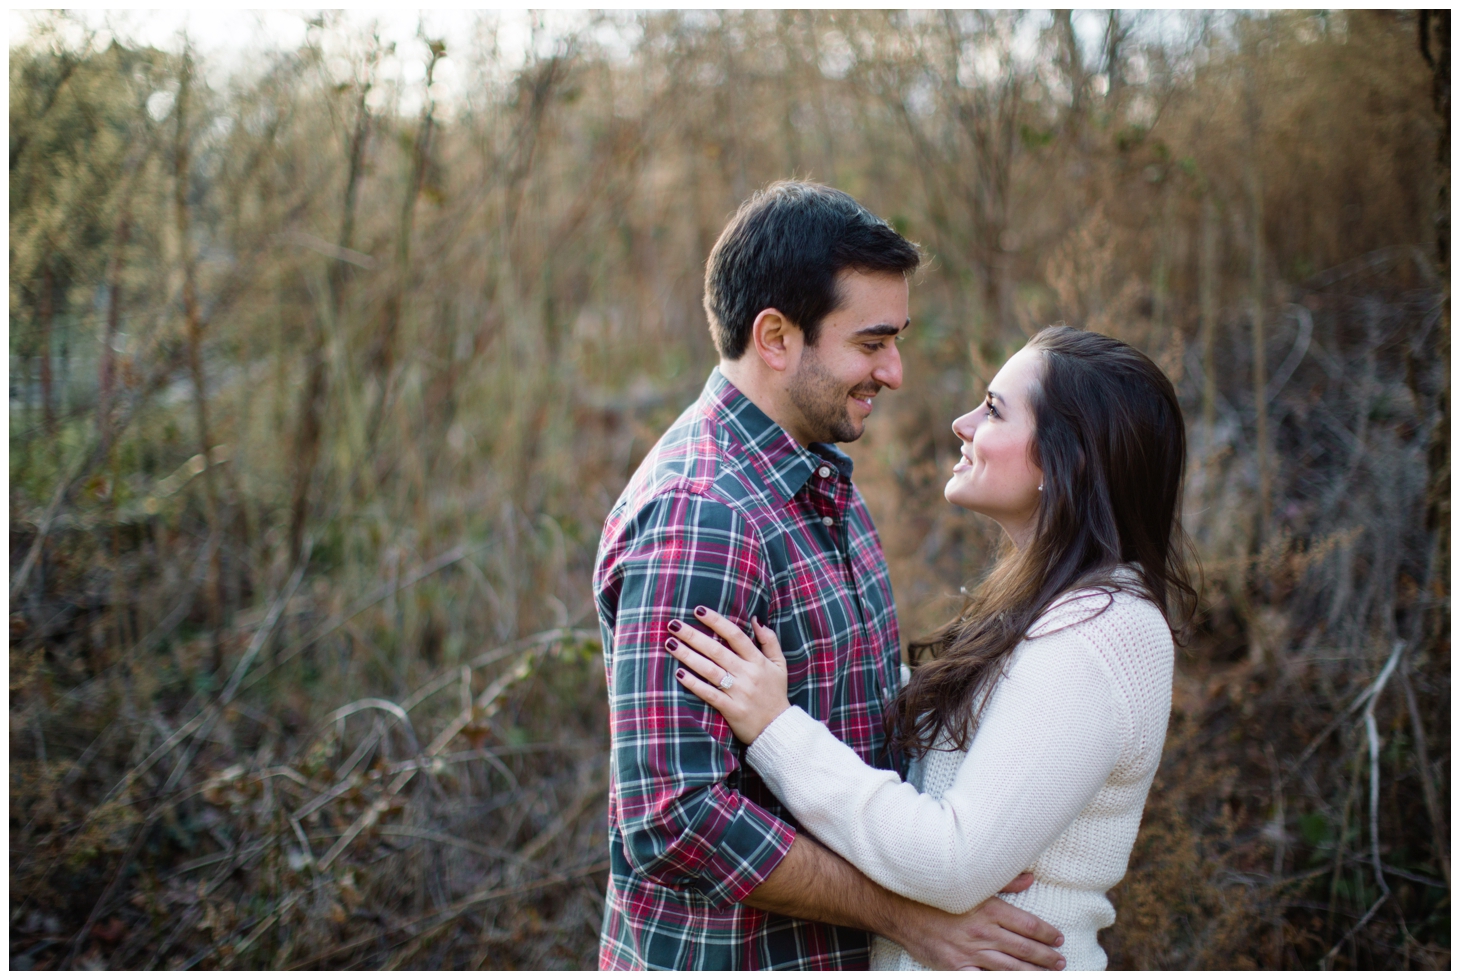 Winter engagement session at Peirce Mill Park in Washington, DC by Sarah Bradshaw Photography